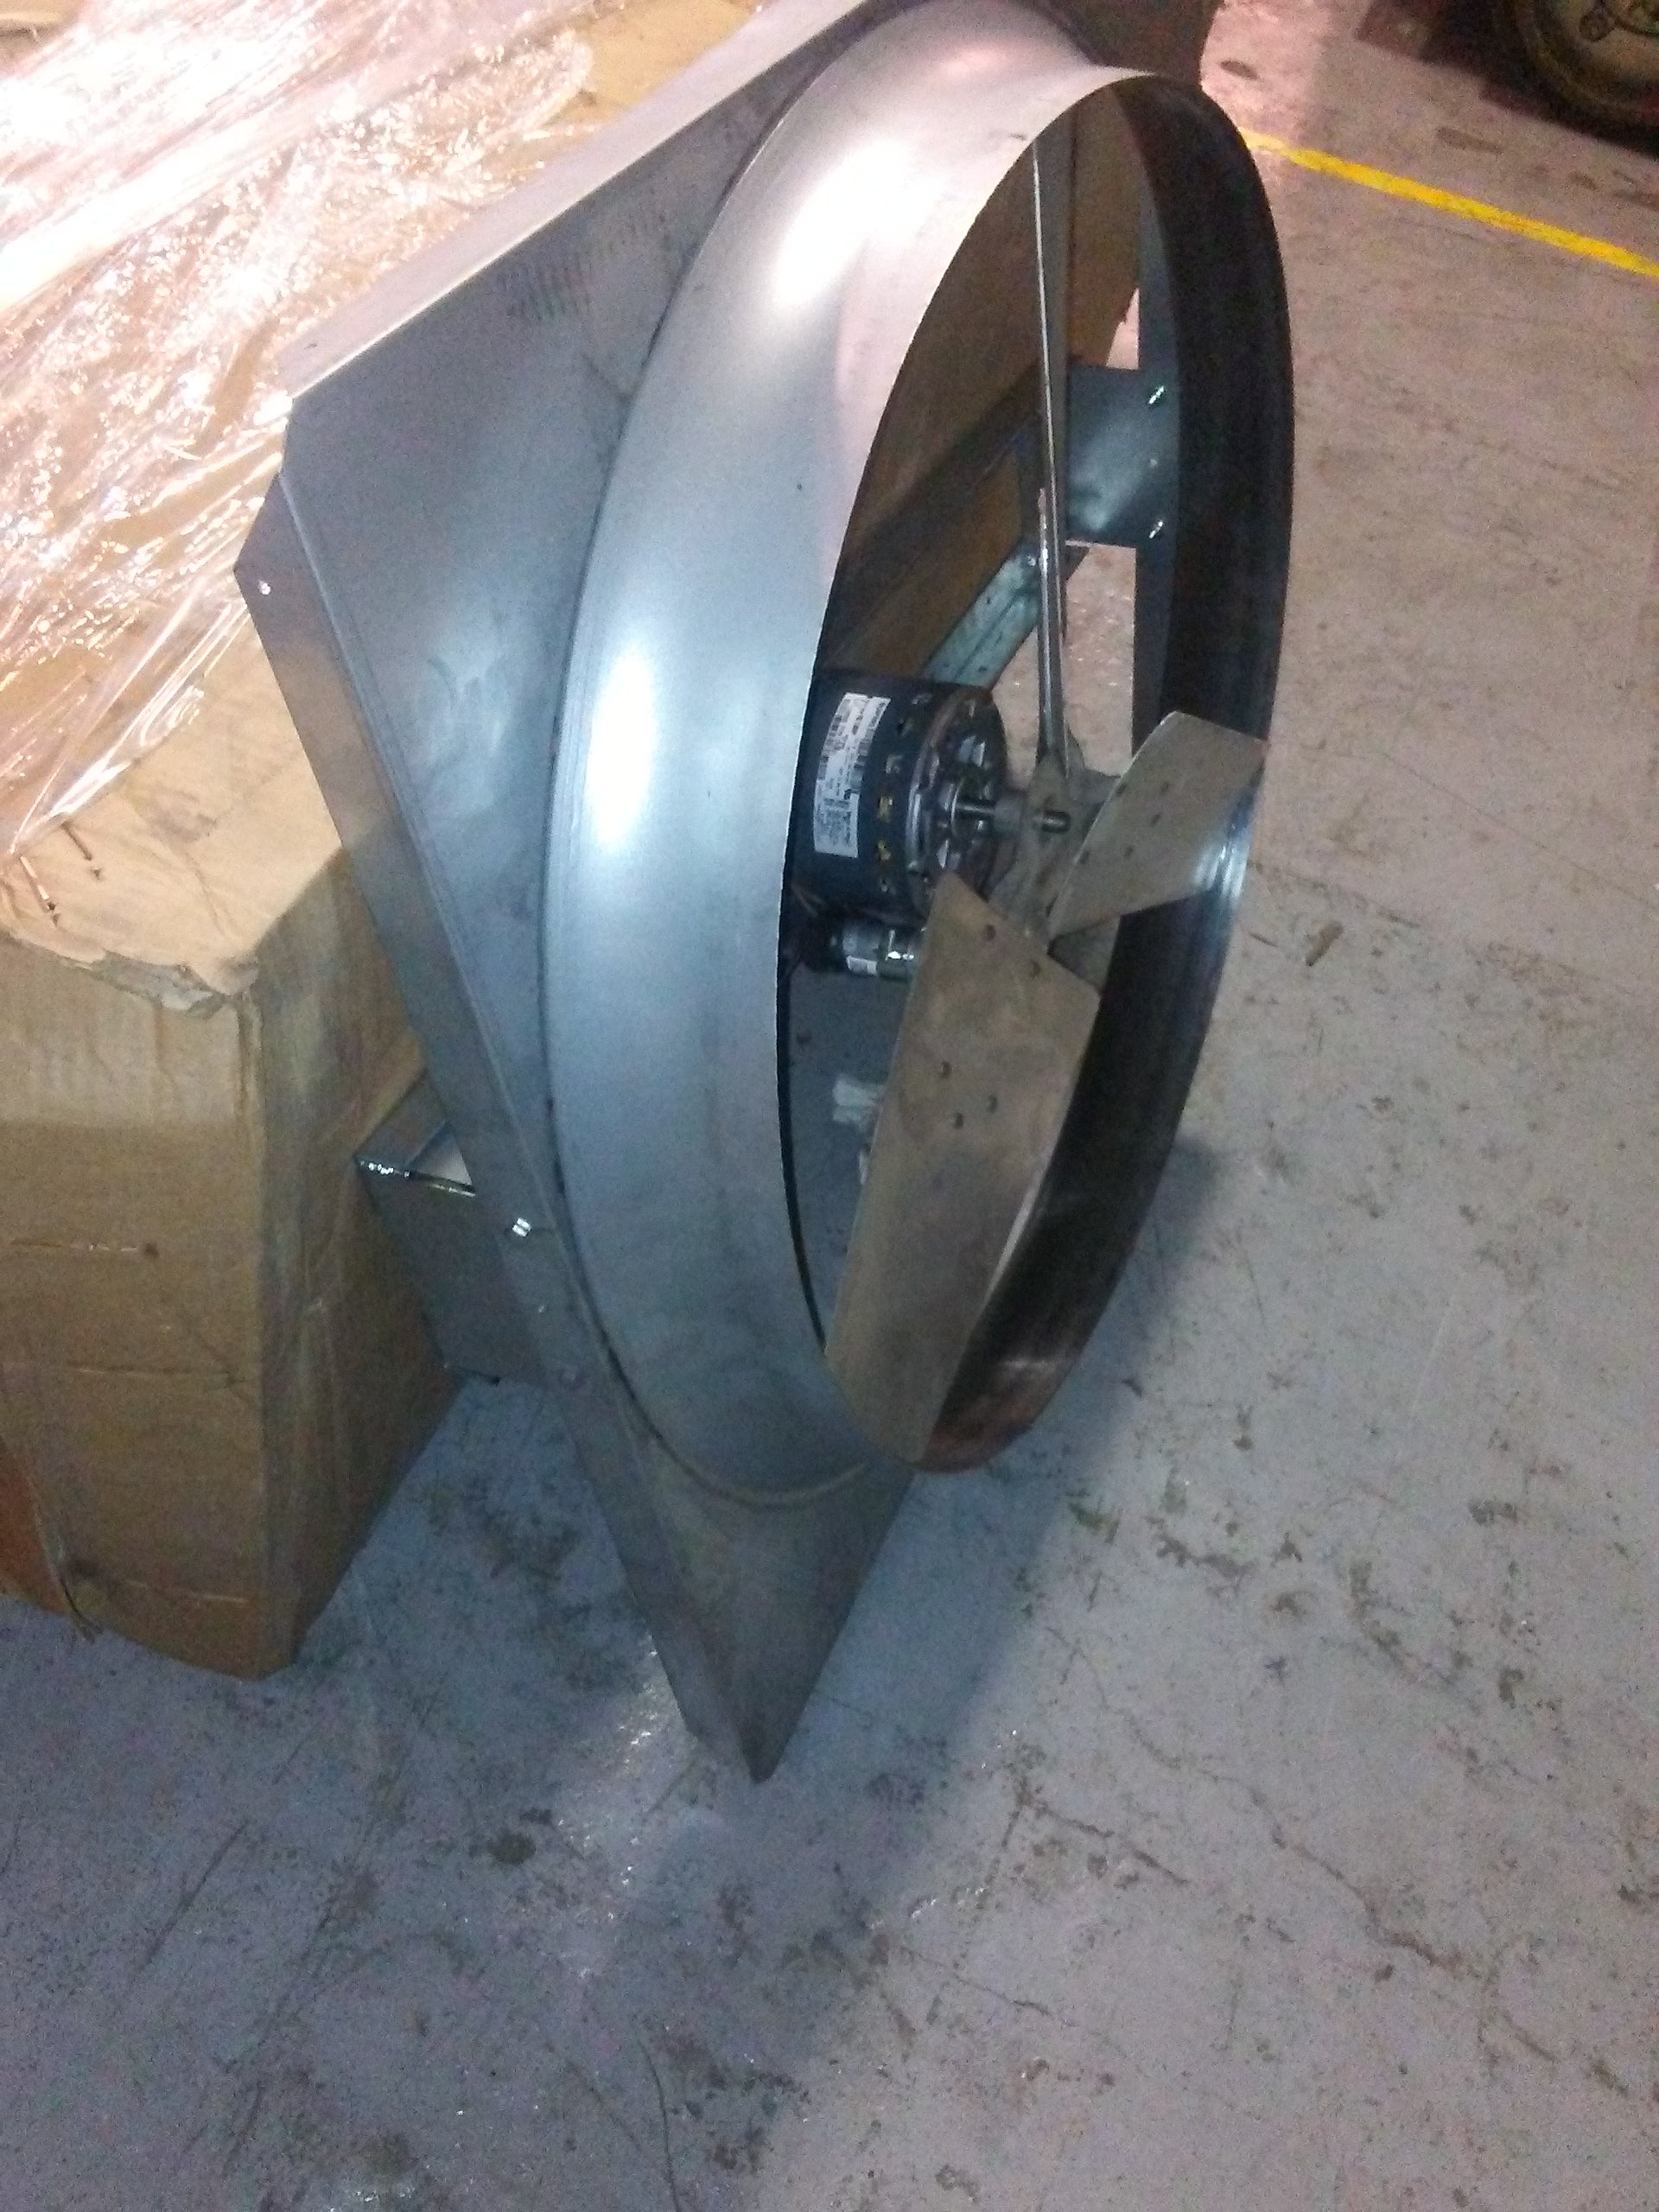 2-SPEED DIRECT DRIVE WHOLE HOUSE FAN, 30" BLADE DIA.